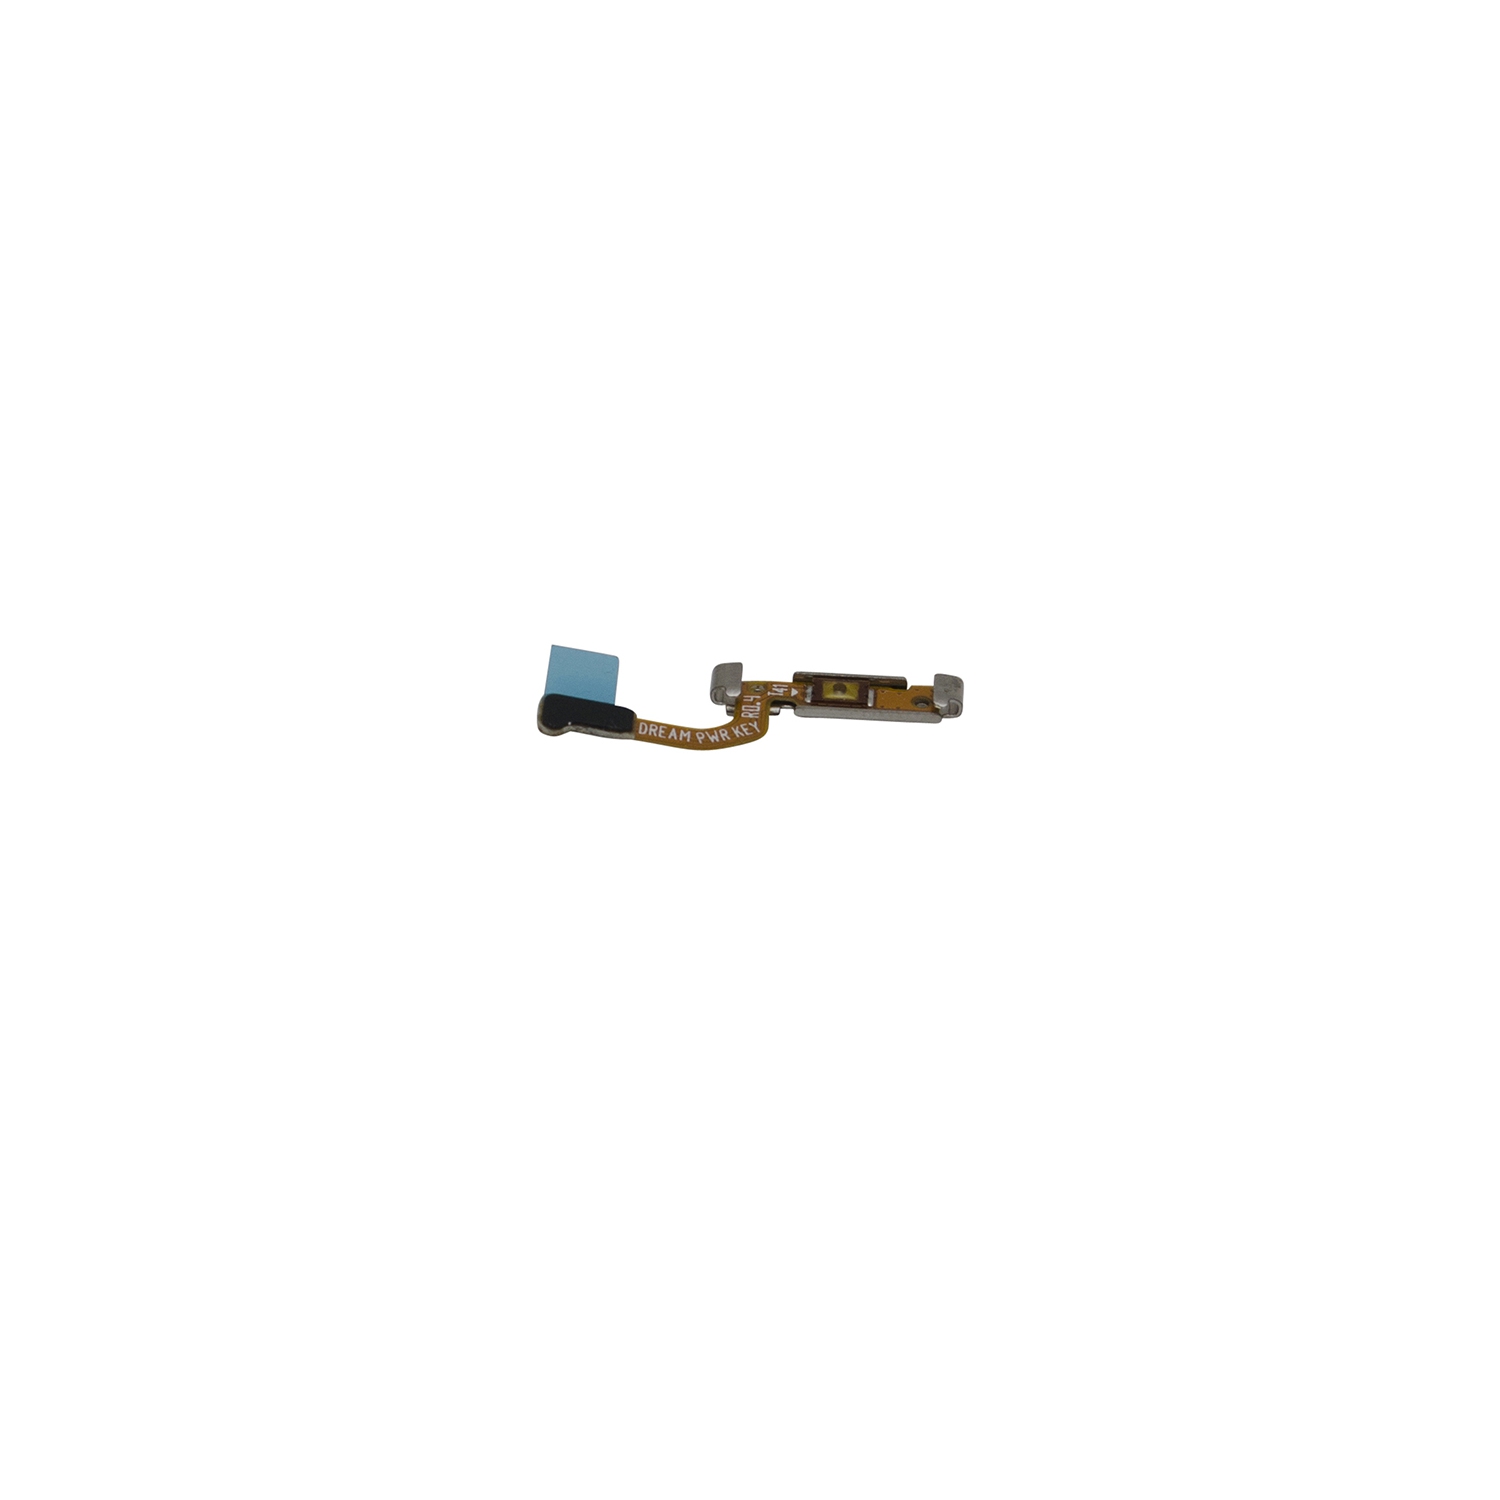 Samsung Galaxy S8 & S8 Plus Power Button Flex Cable Replacement